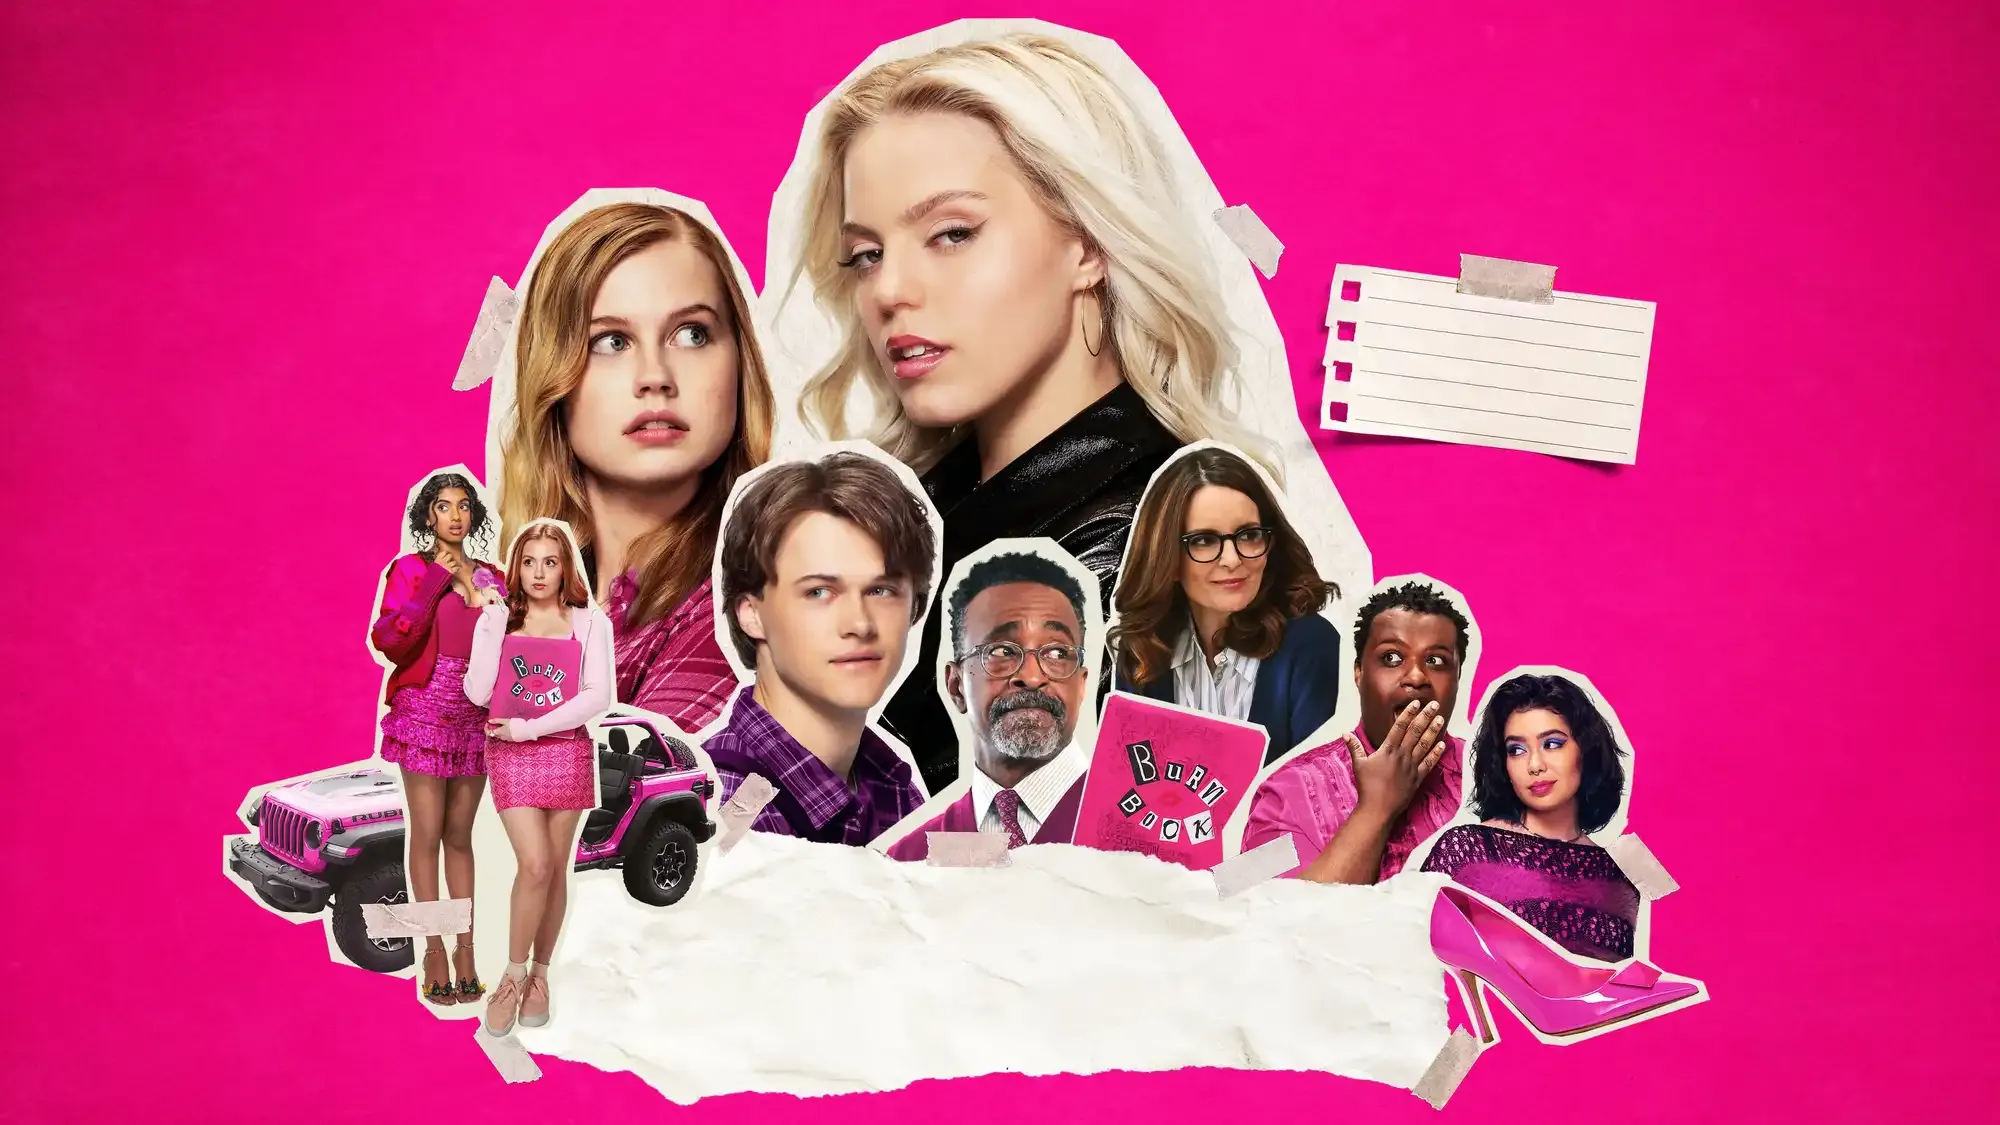 Mean Girls movie review